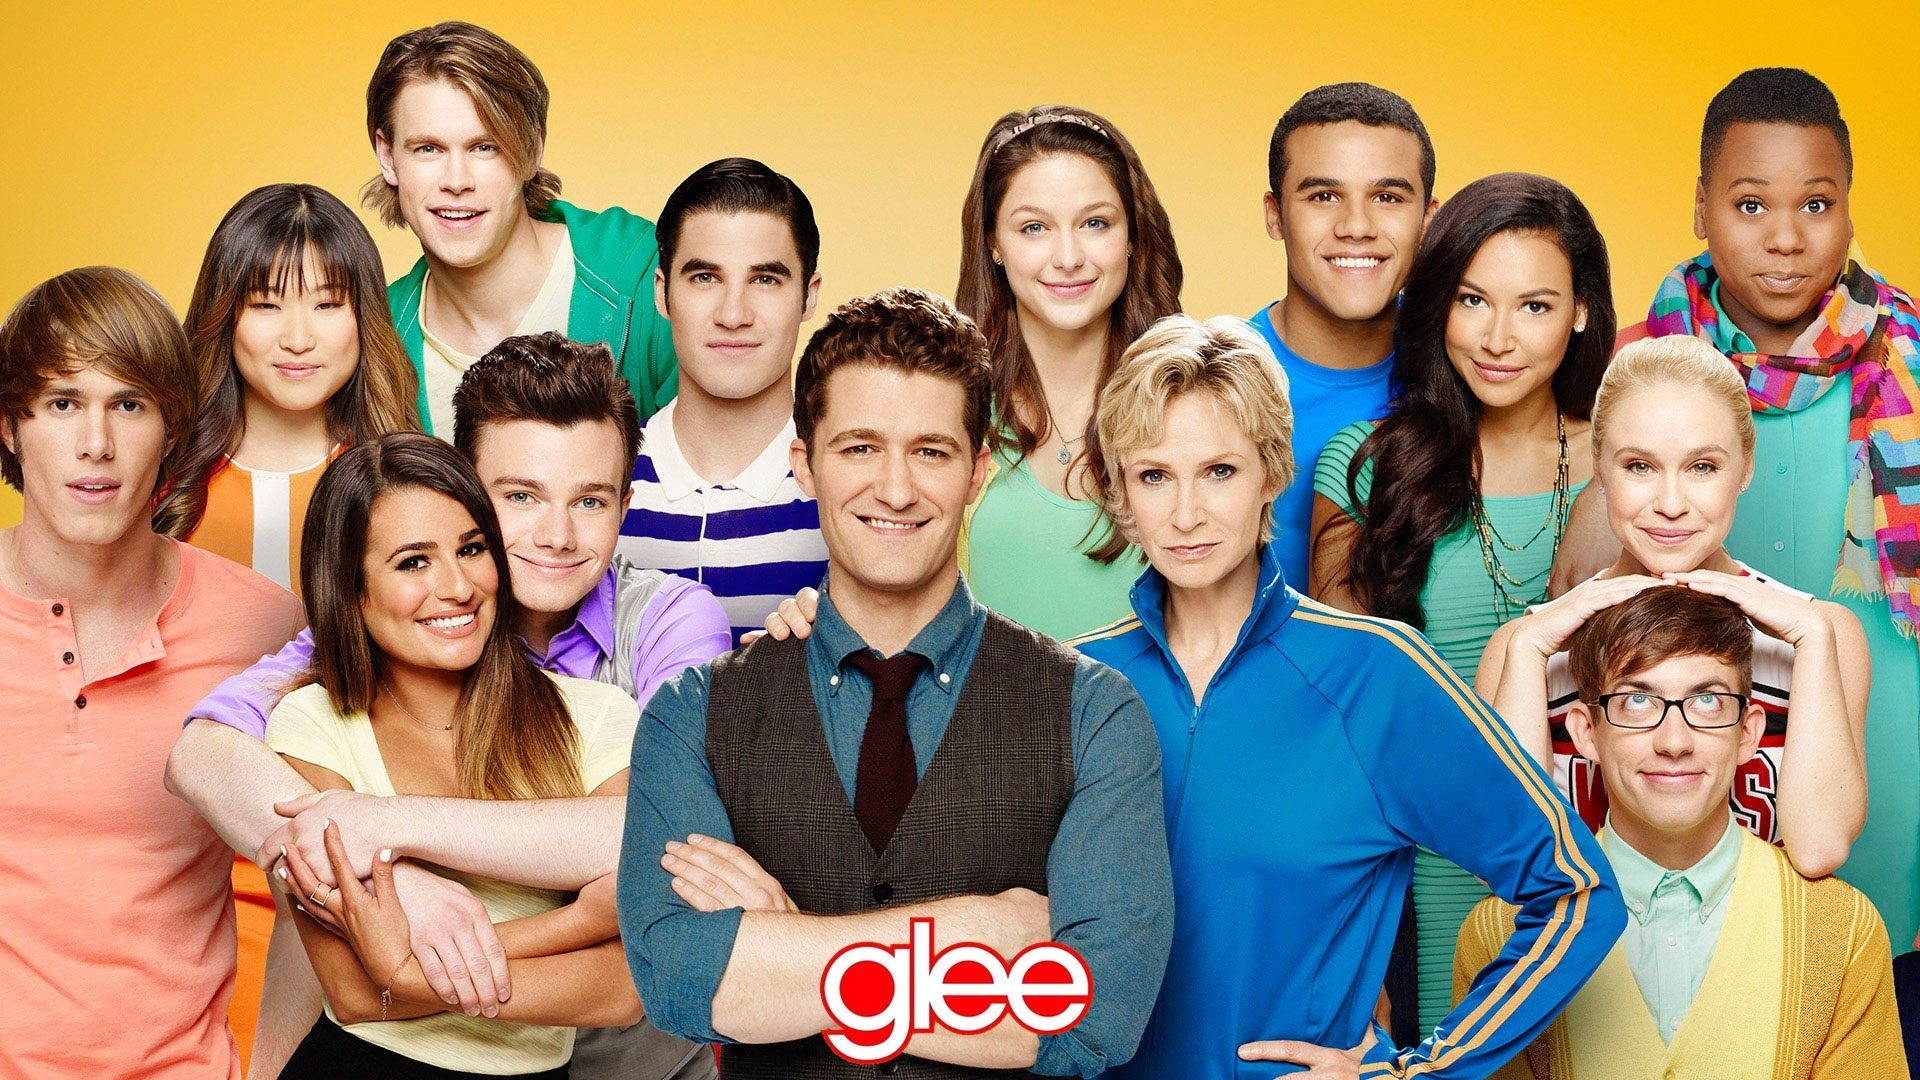 1920x1080 Glee wallpaper possibly containing a portrait called Glee